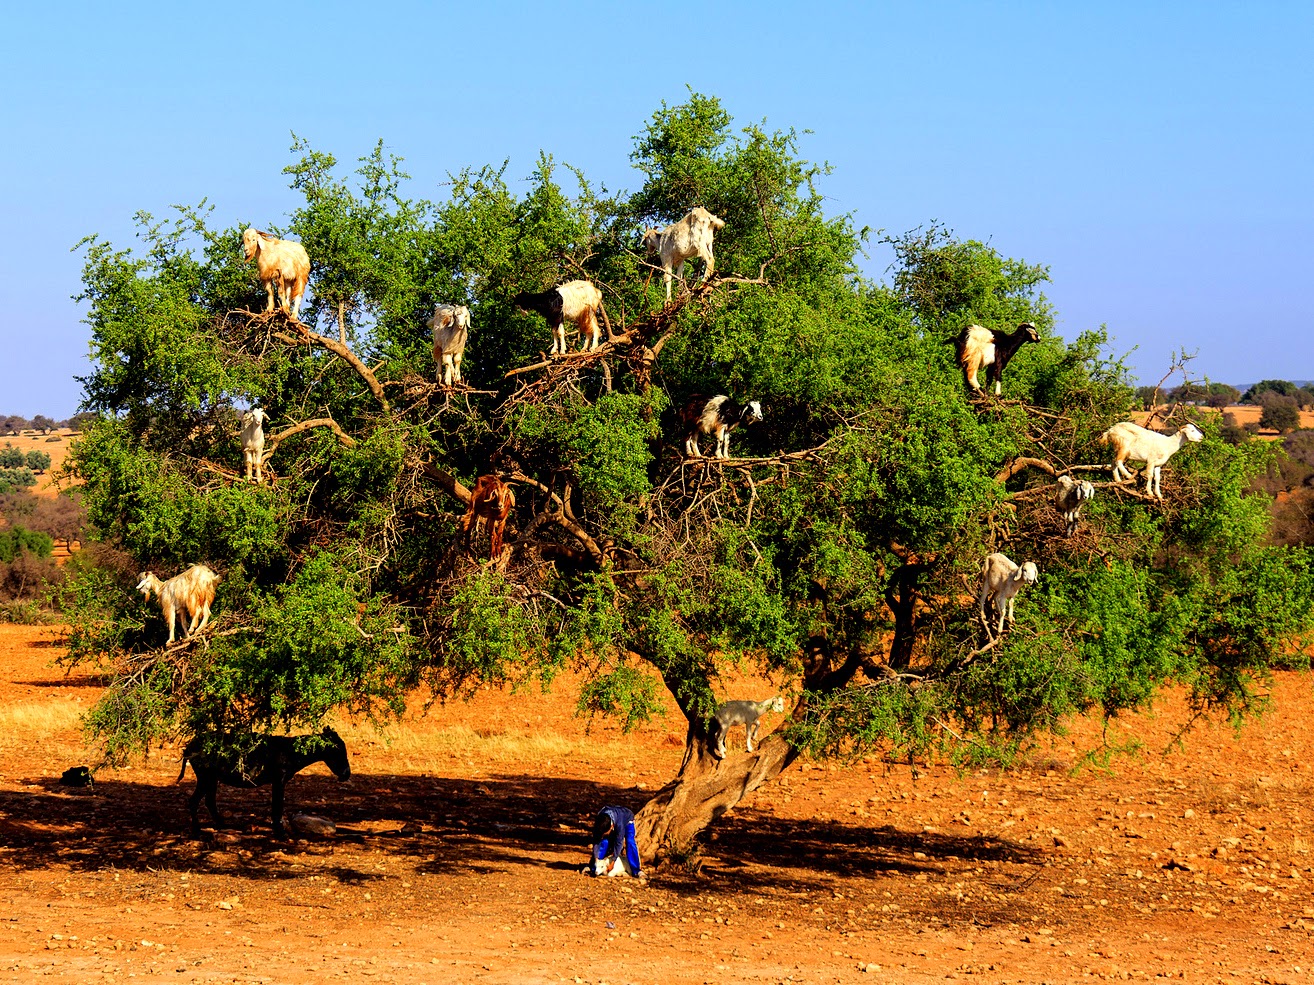 The Flying Tortoise: So You Thought Goats Couldn't Climb Trees...